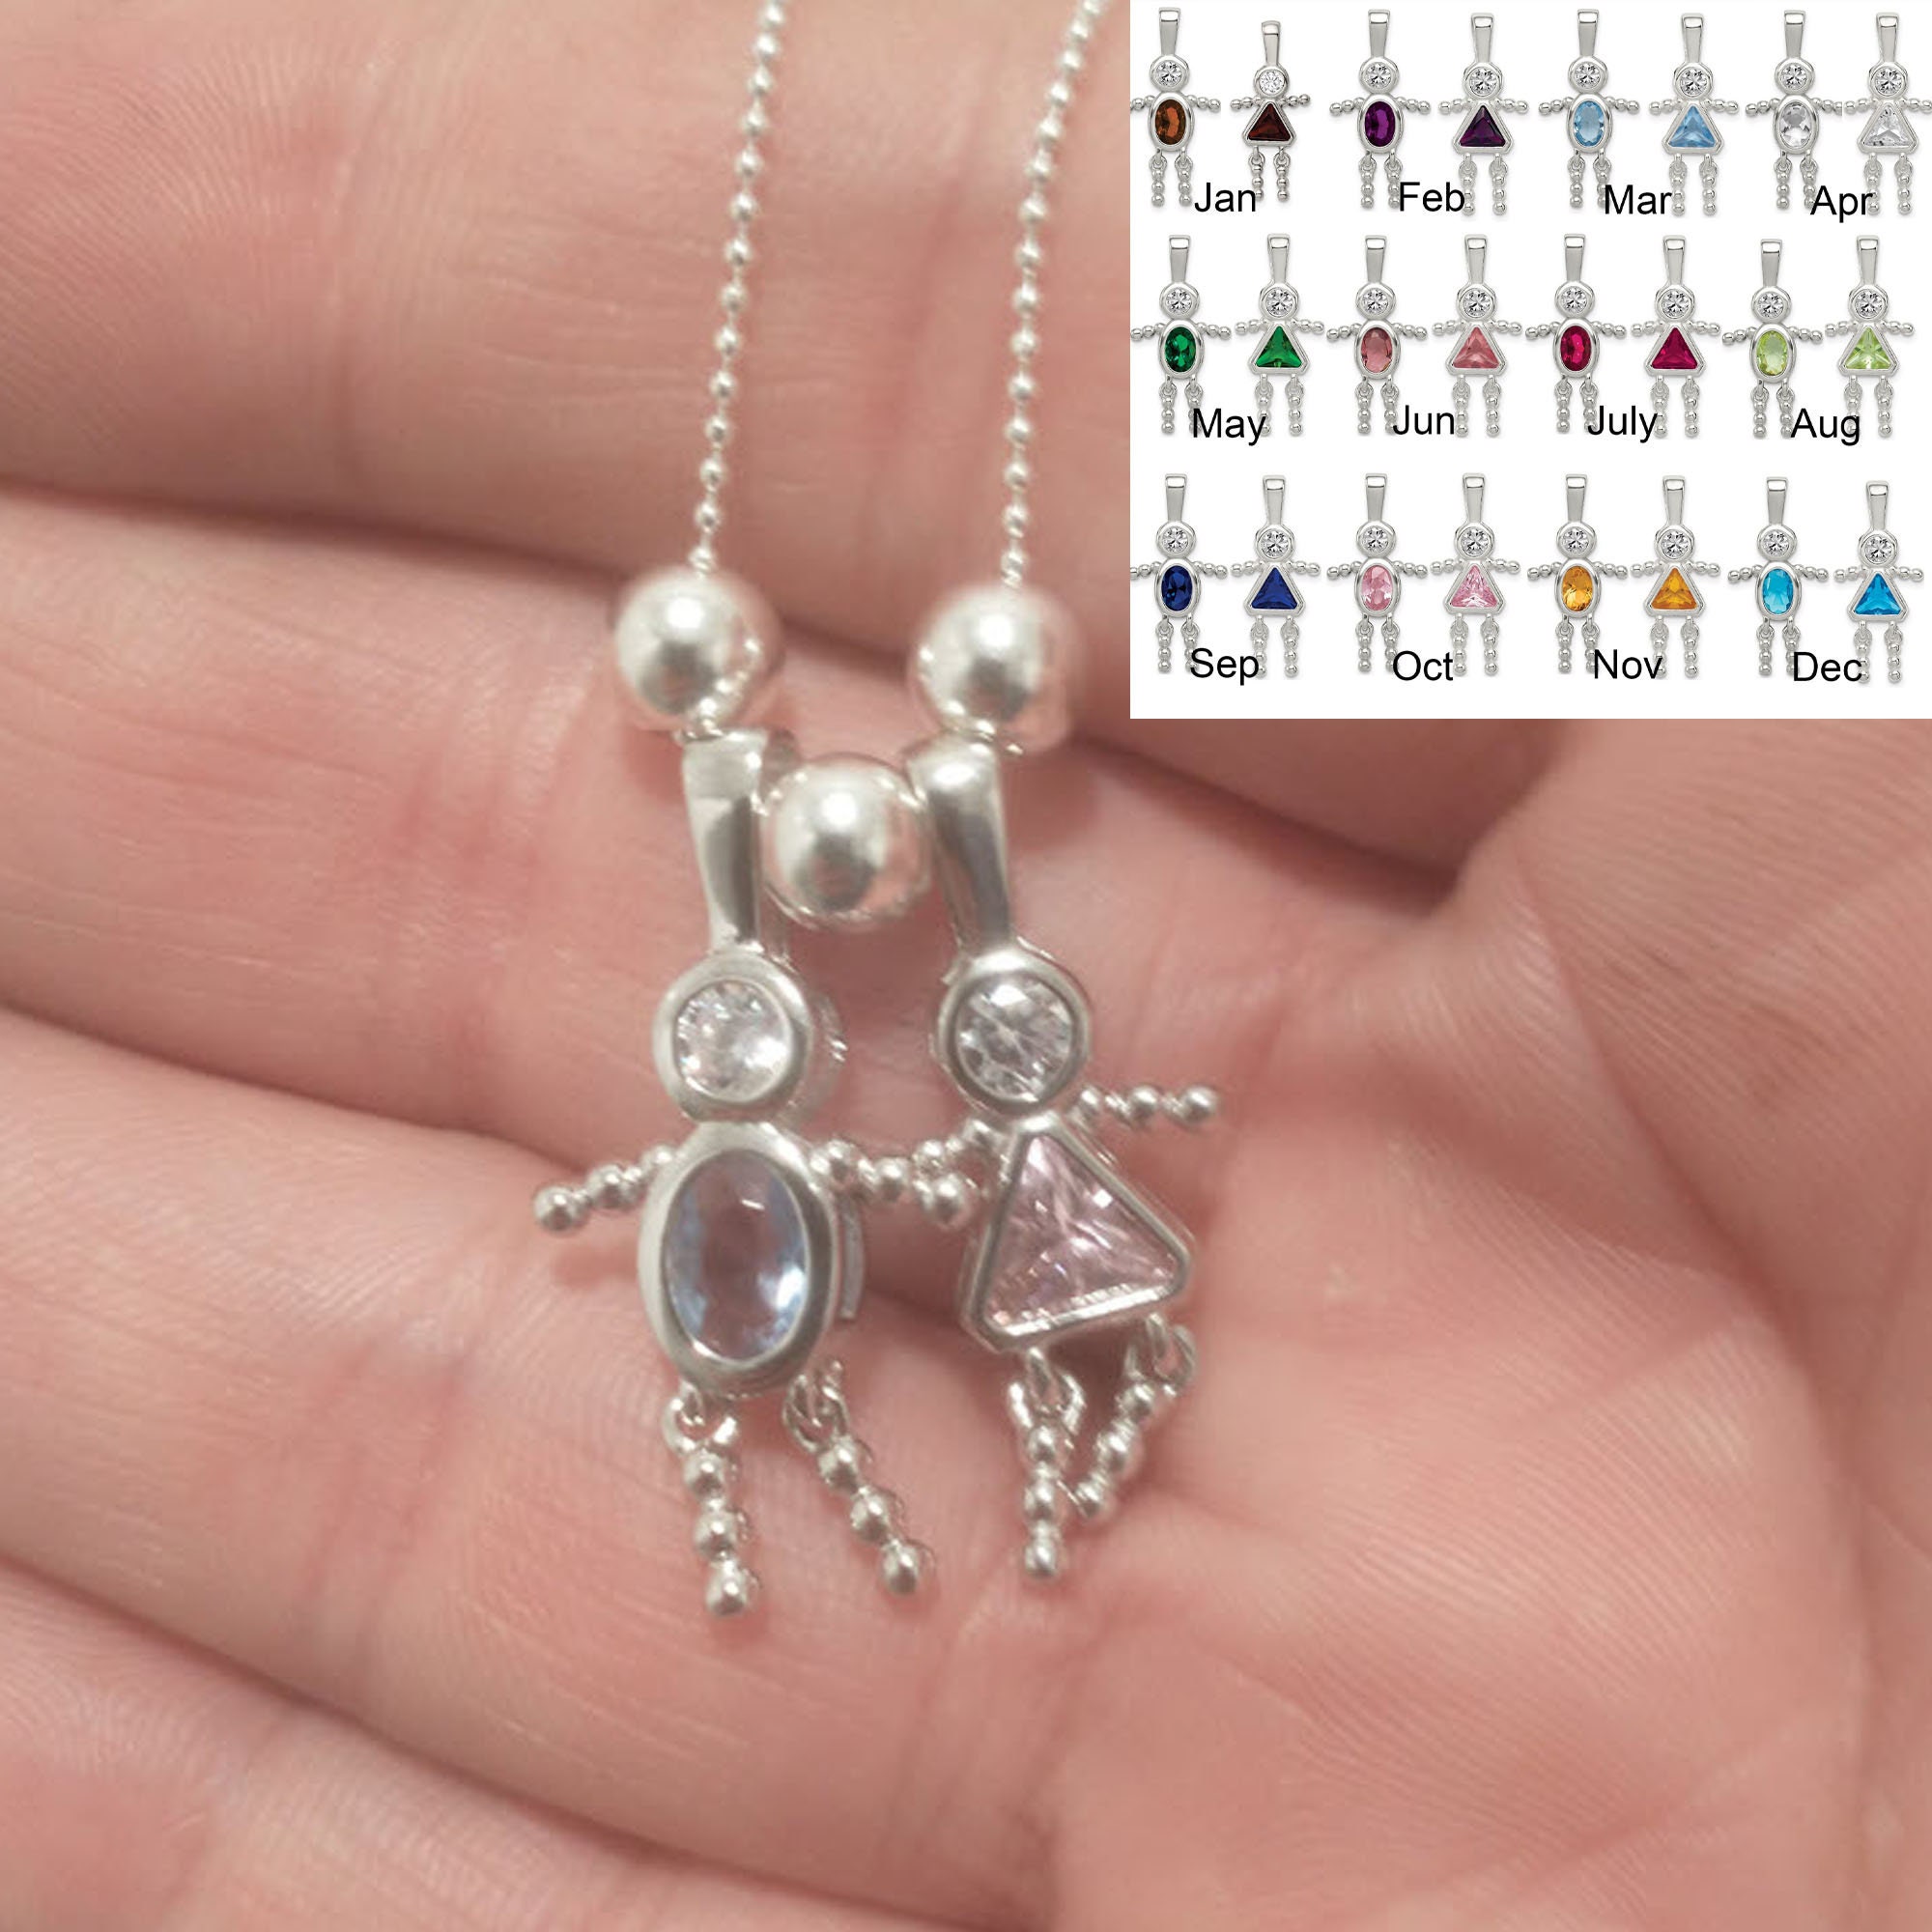 Triple Goddess Charm with Birthstone Necklace – Blessed Be Magick